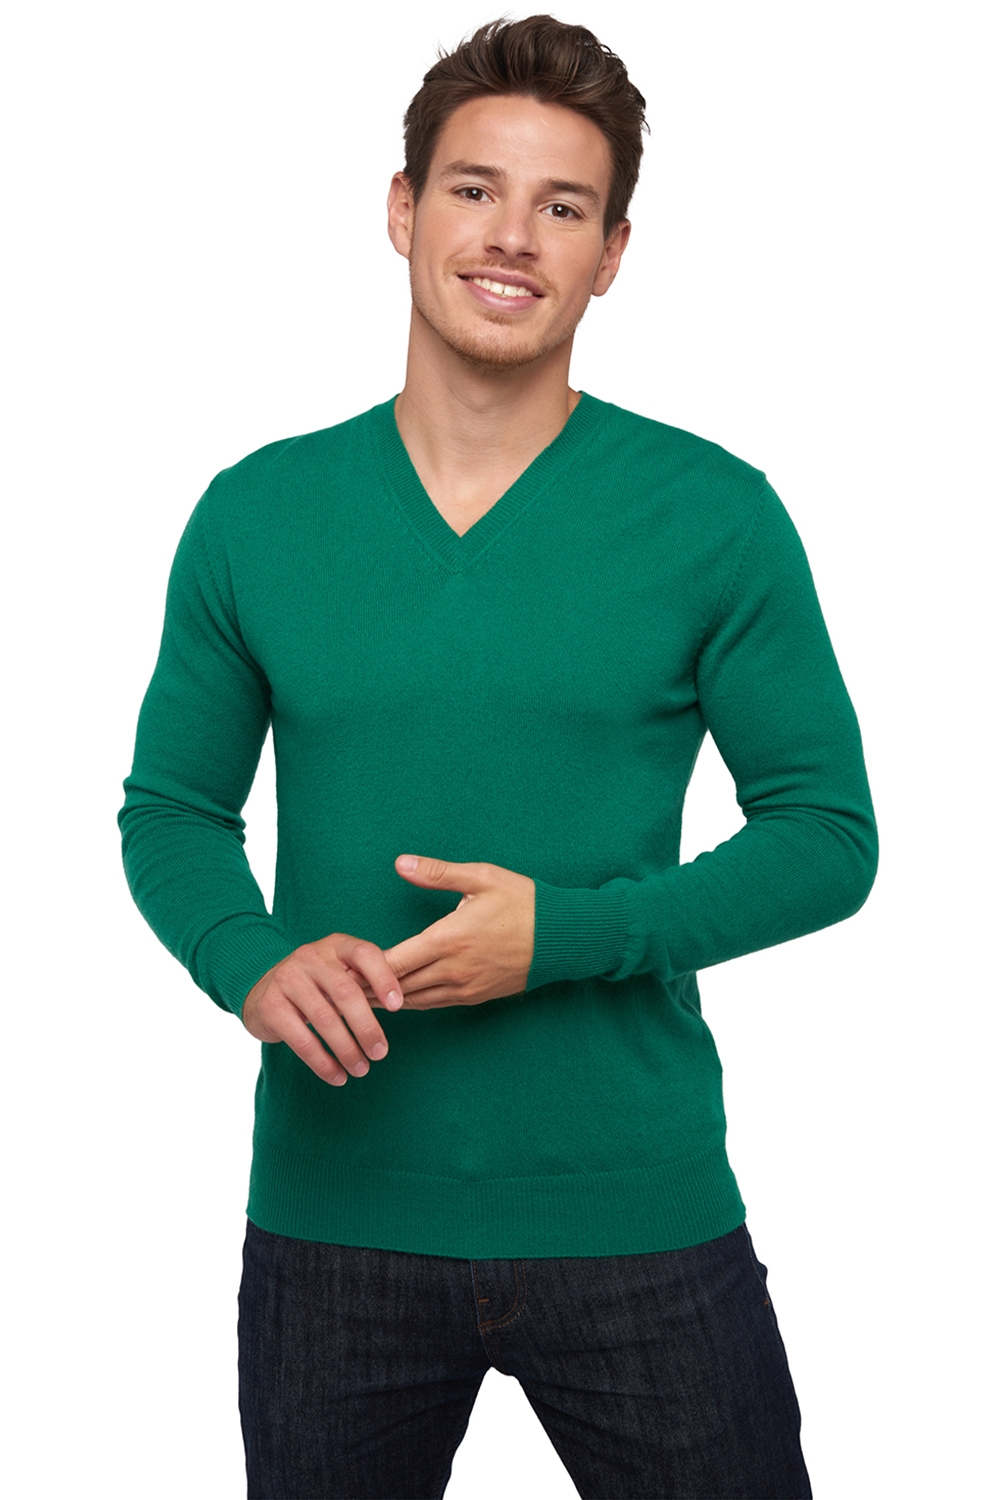 Cashmere men low prices tor first green grass l